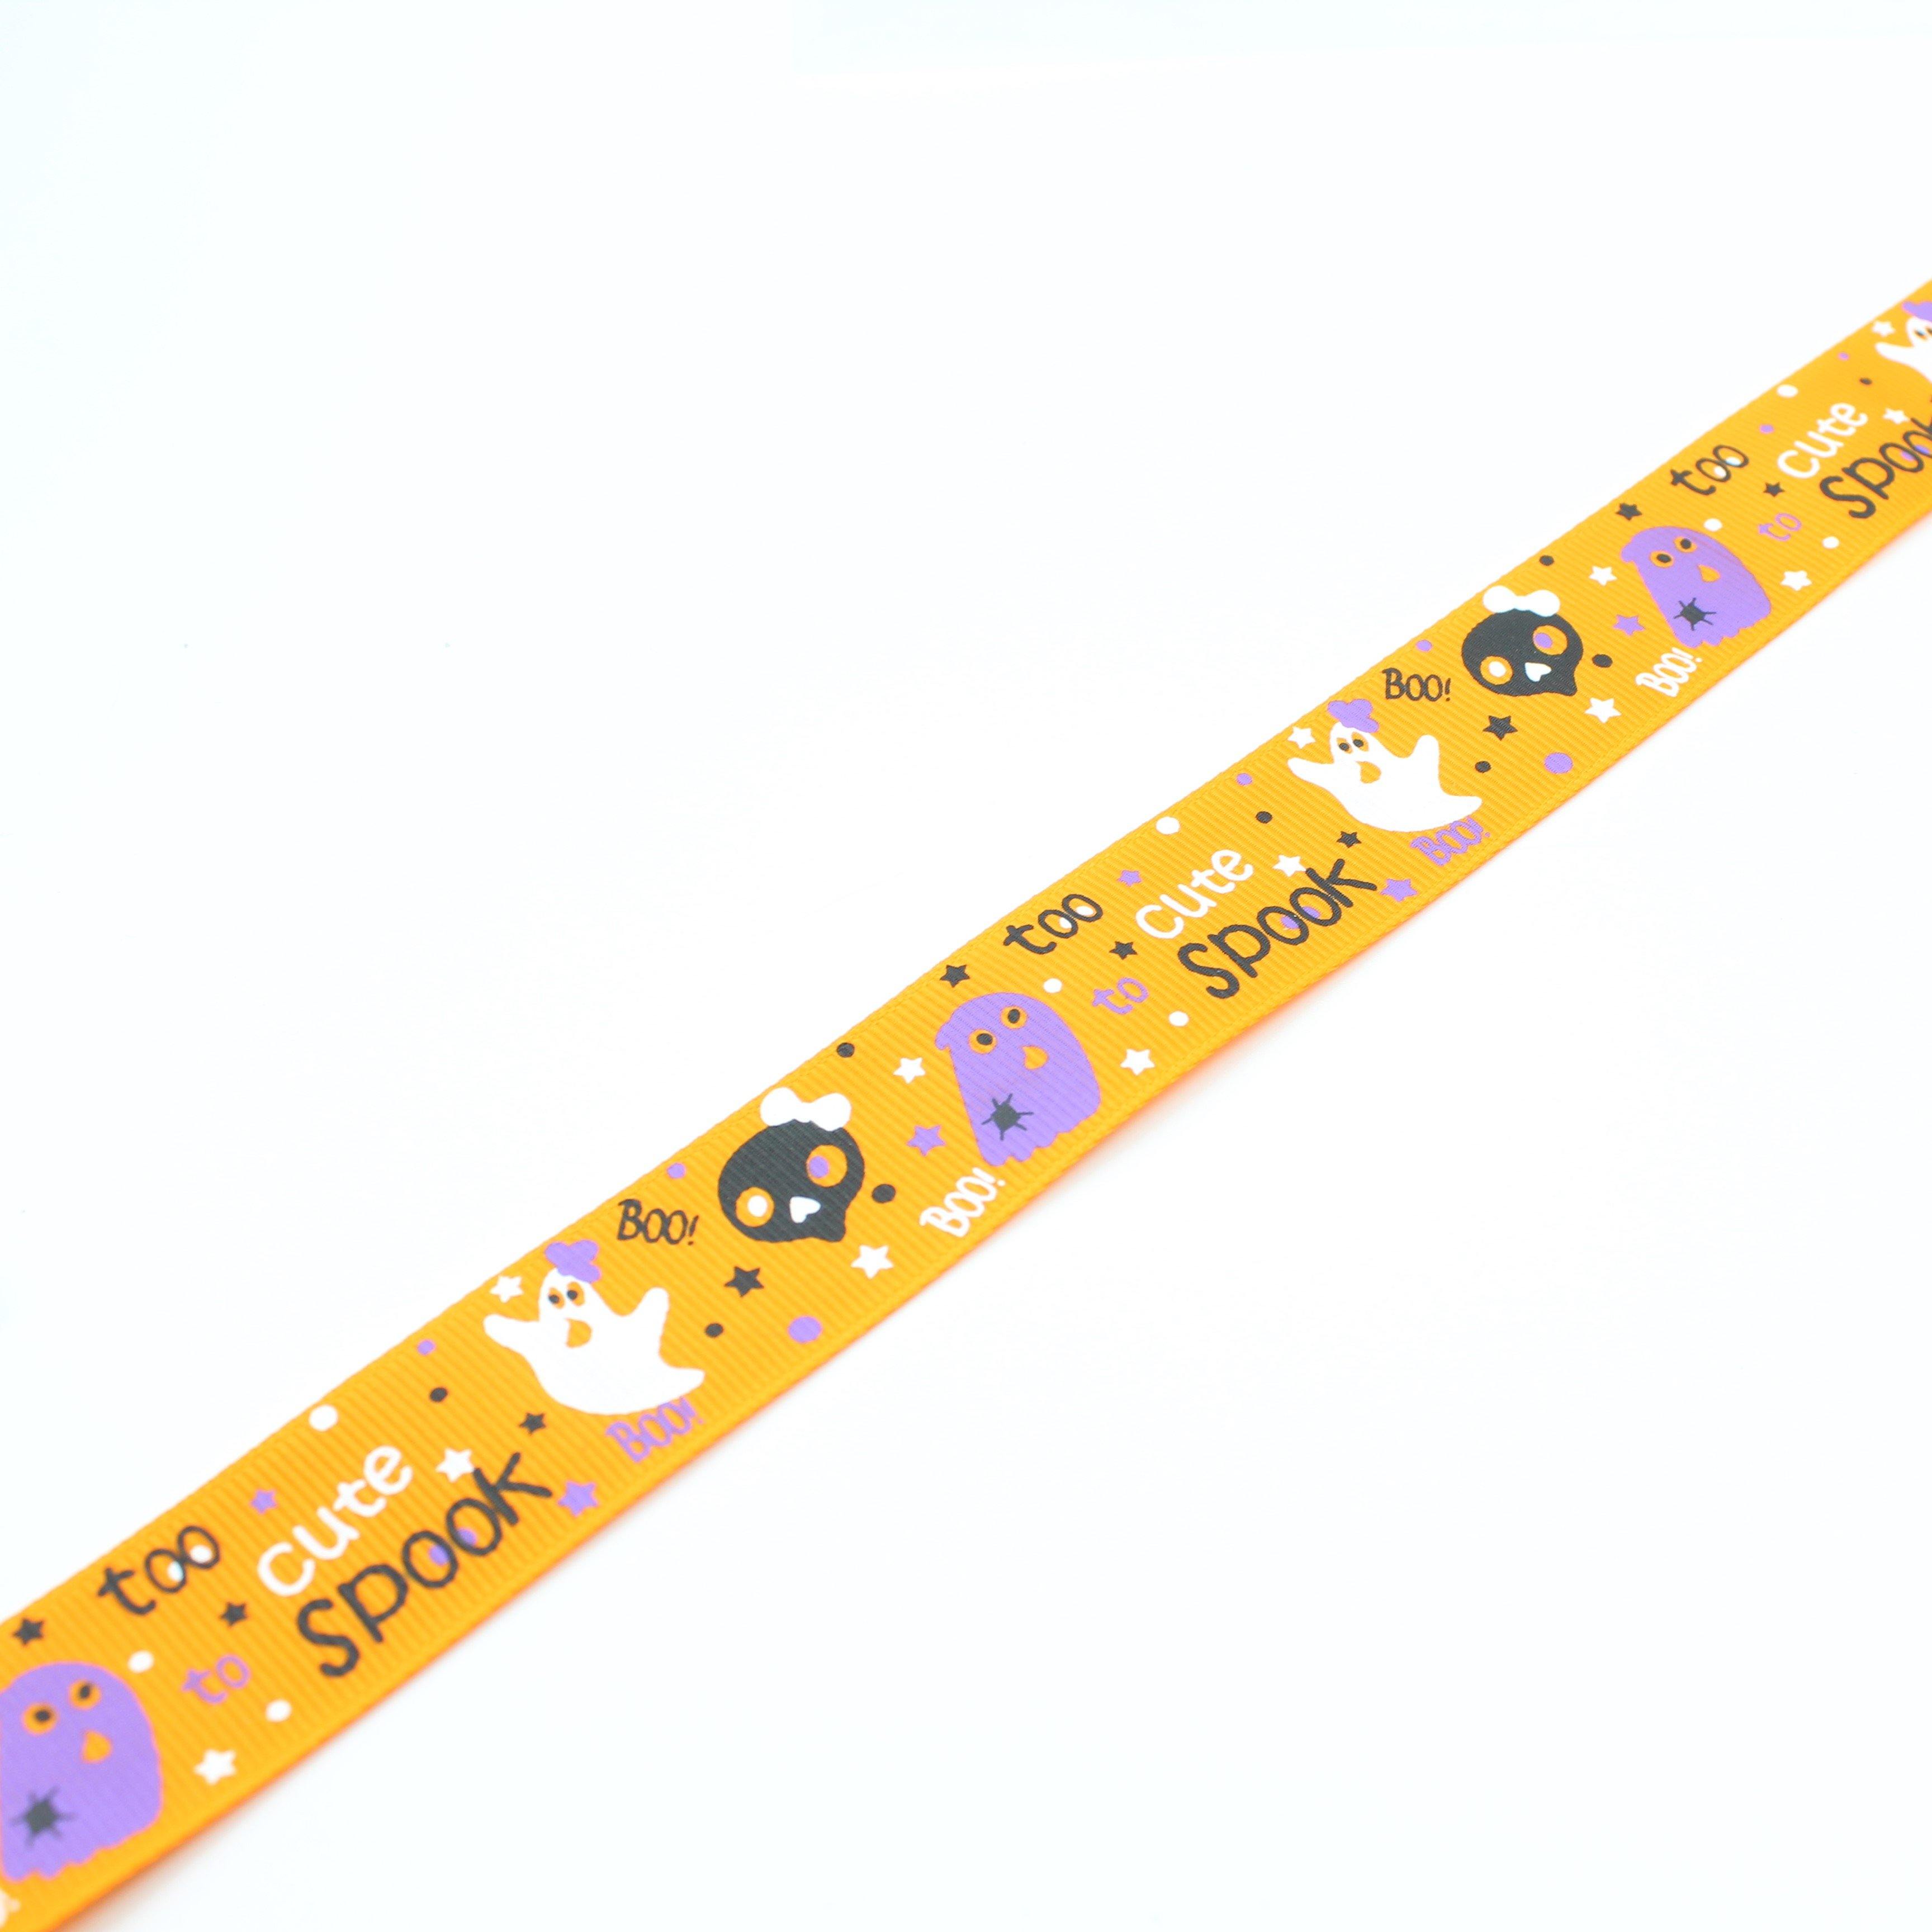 HALLOWEEN Ribbon 3 x 10 meters in 3 colors - ACCESSOIRES LEDUC